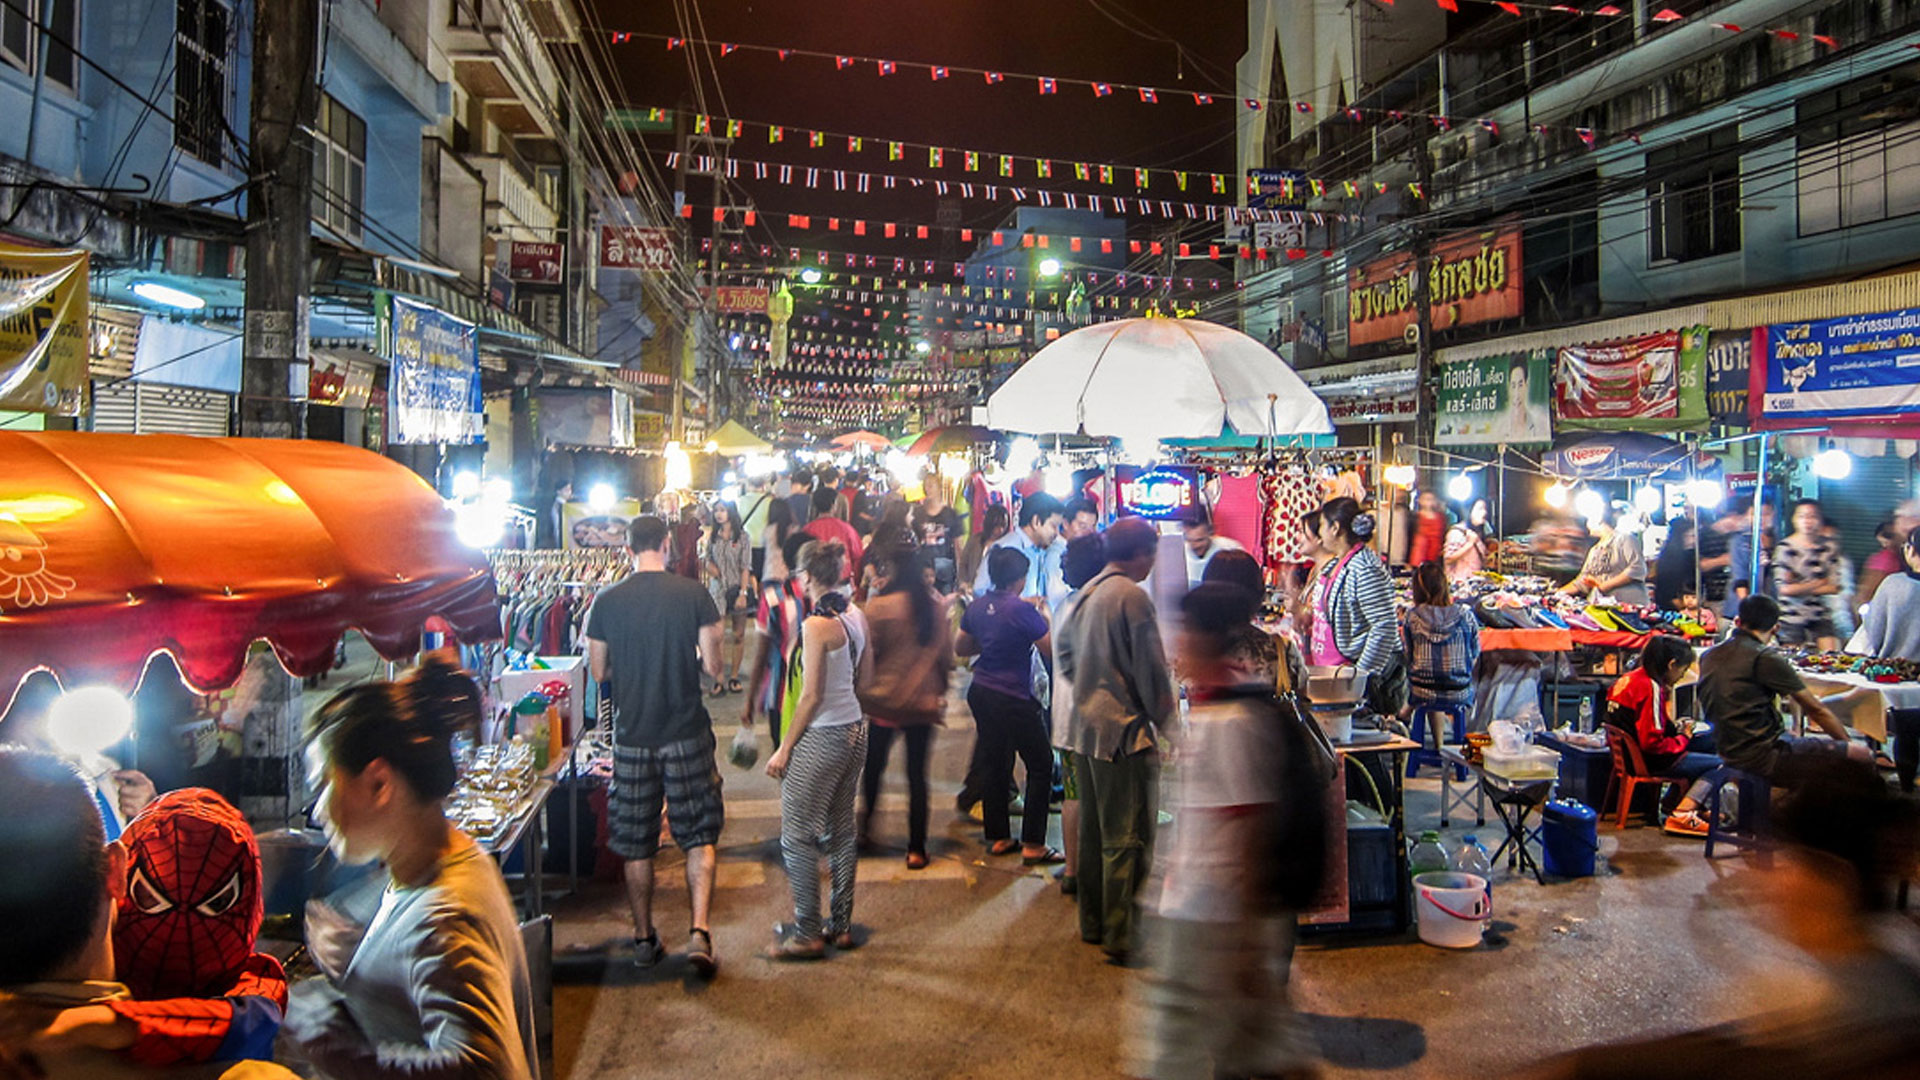 A colorful night market with food vendors and shoppers